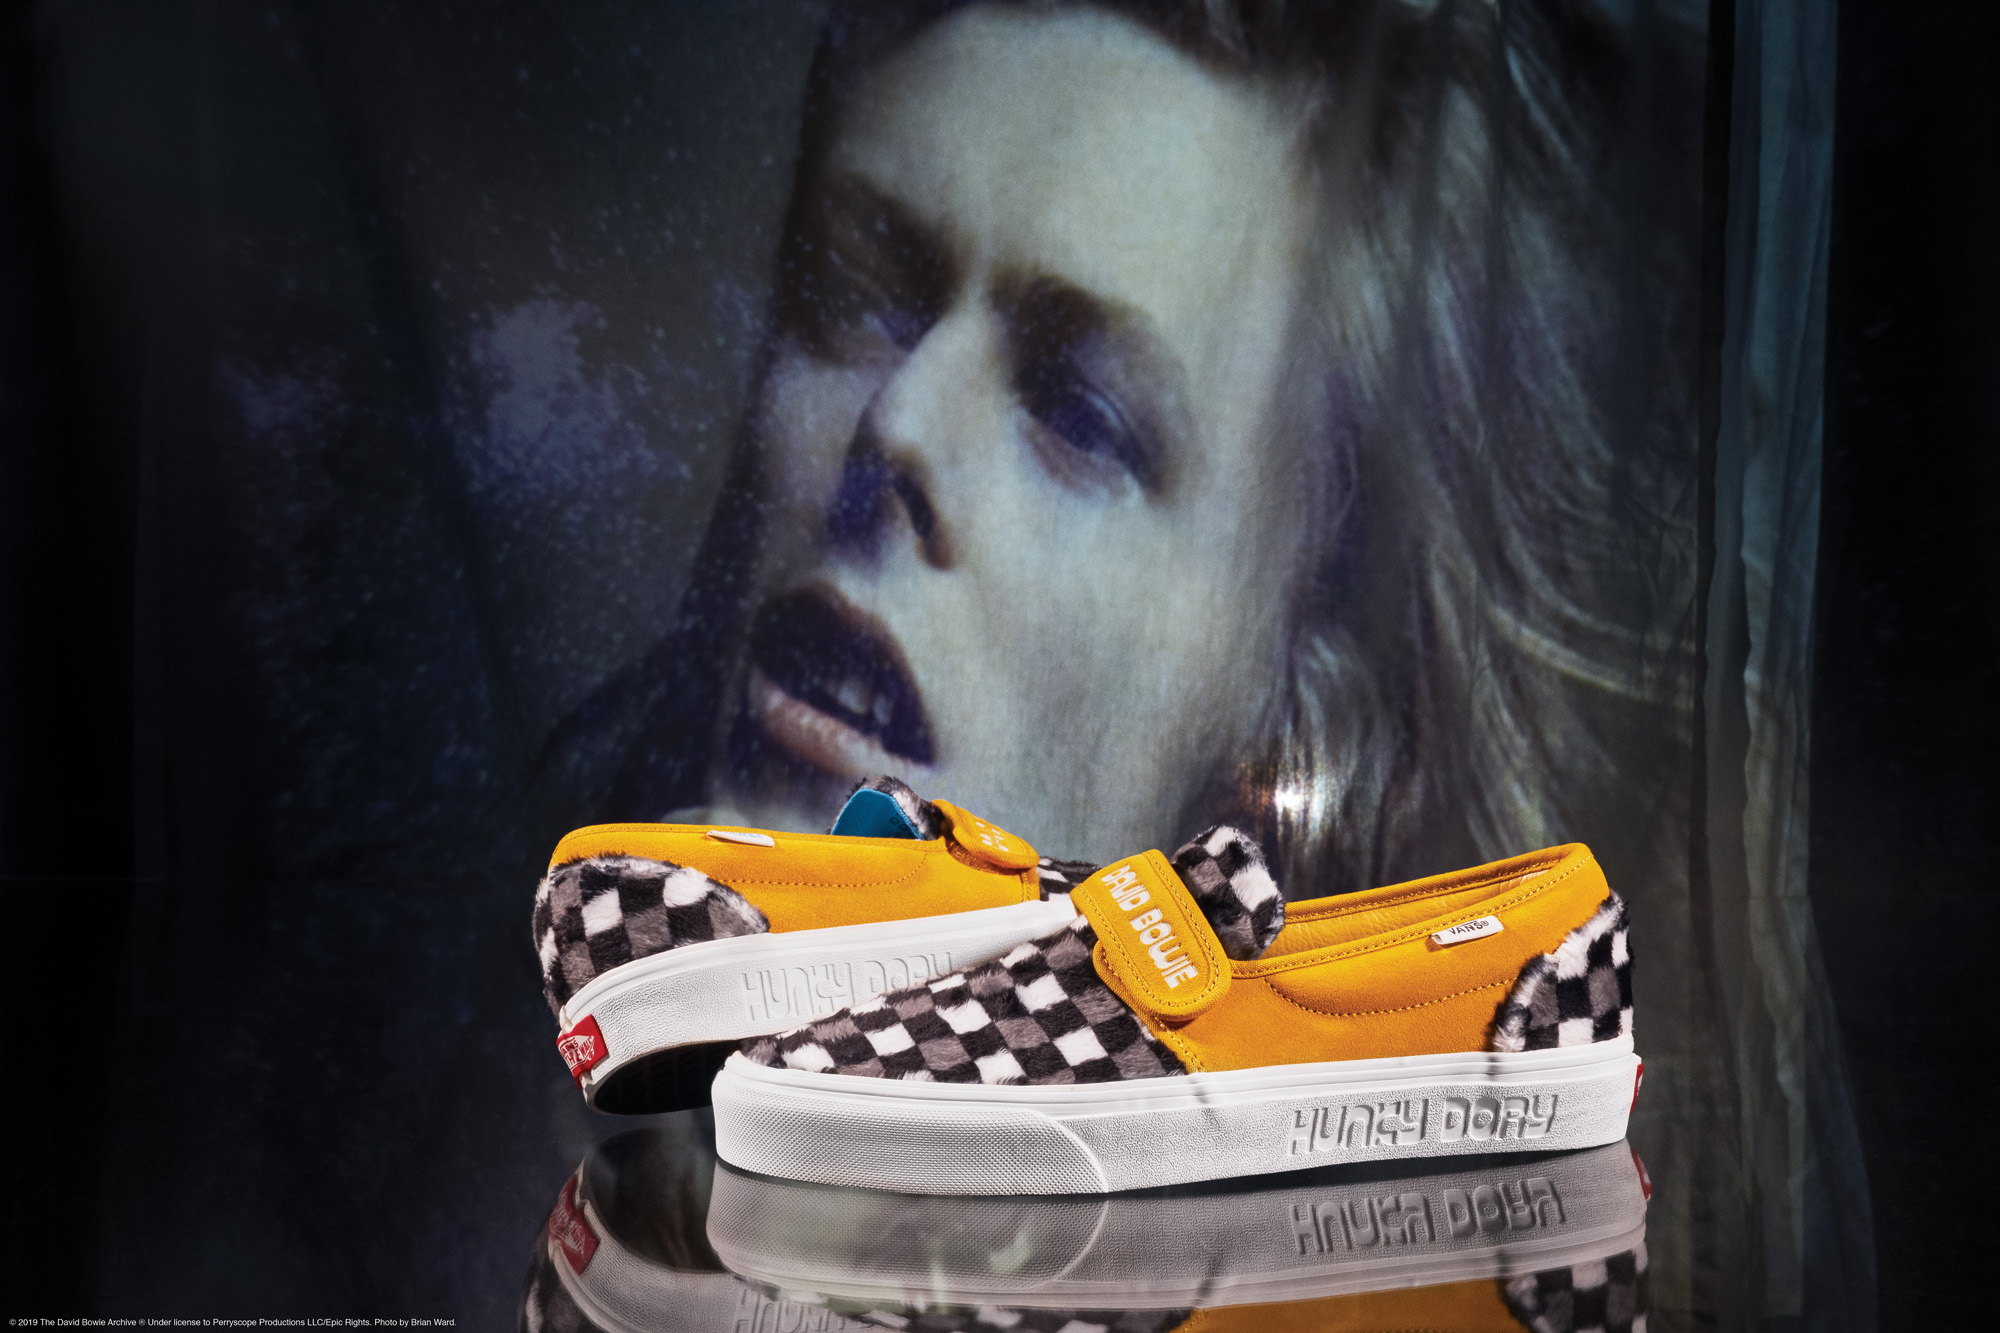 vans x david bowie hunky dory